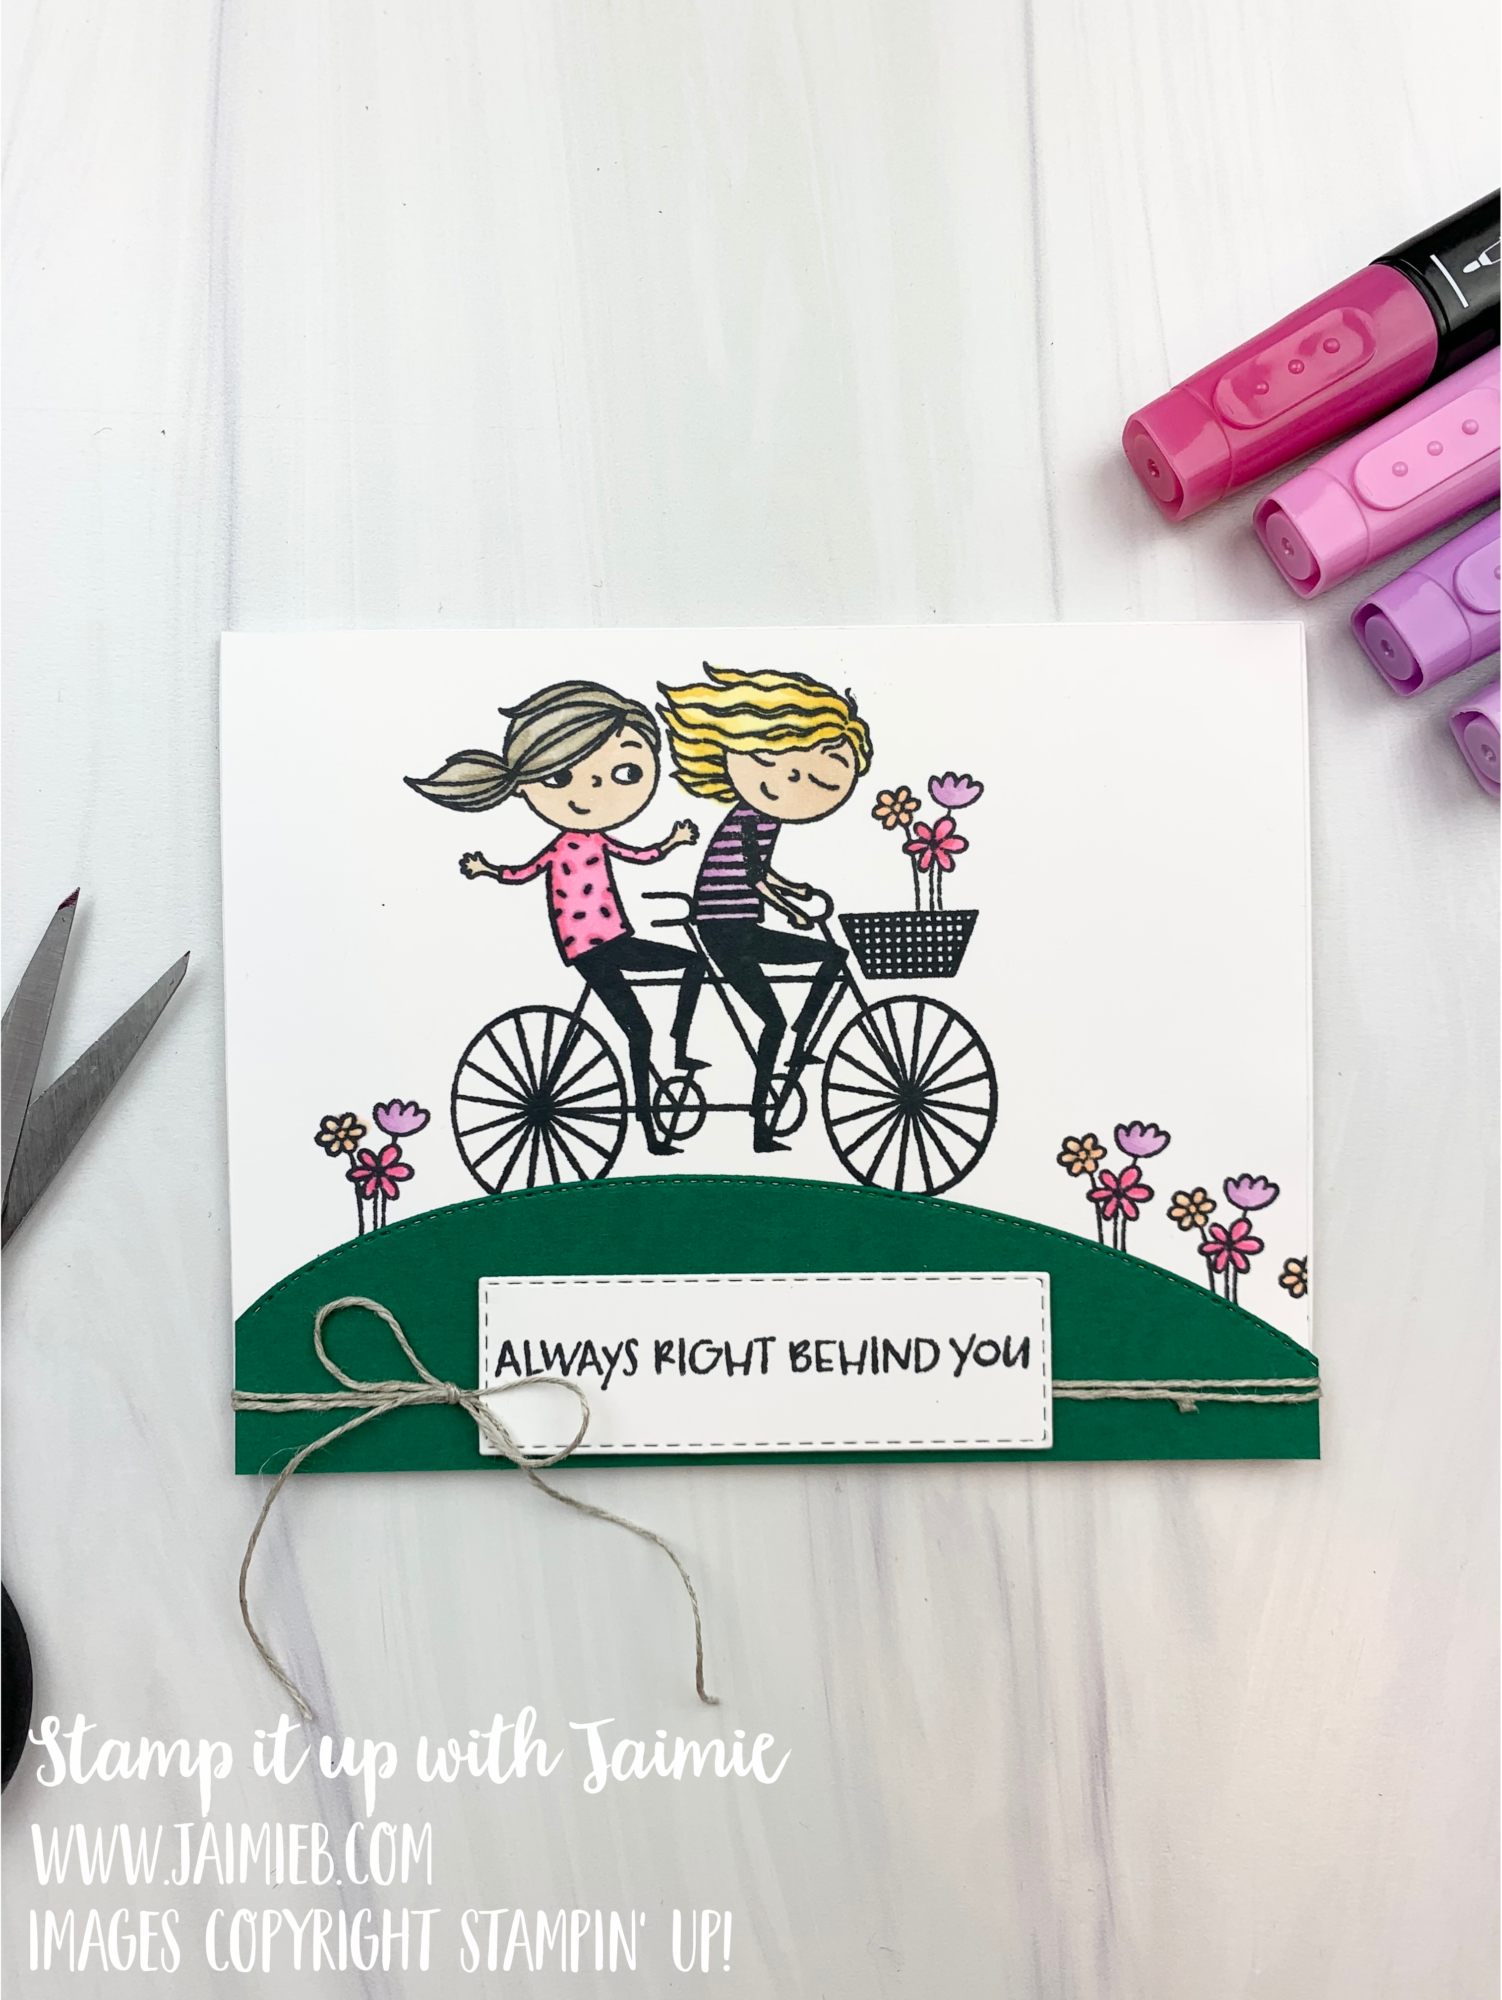 Stampin’ Up! Right Behind You Card